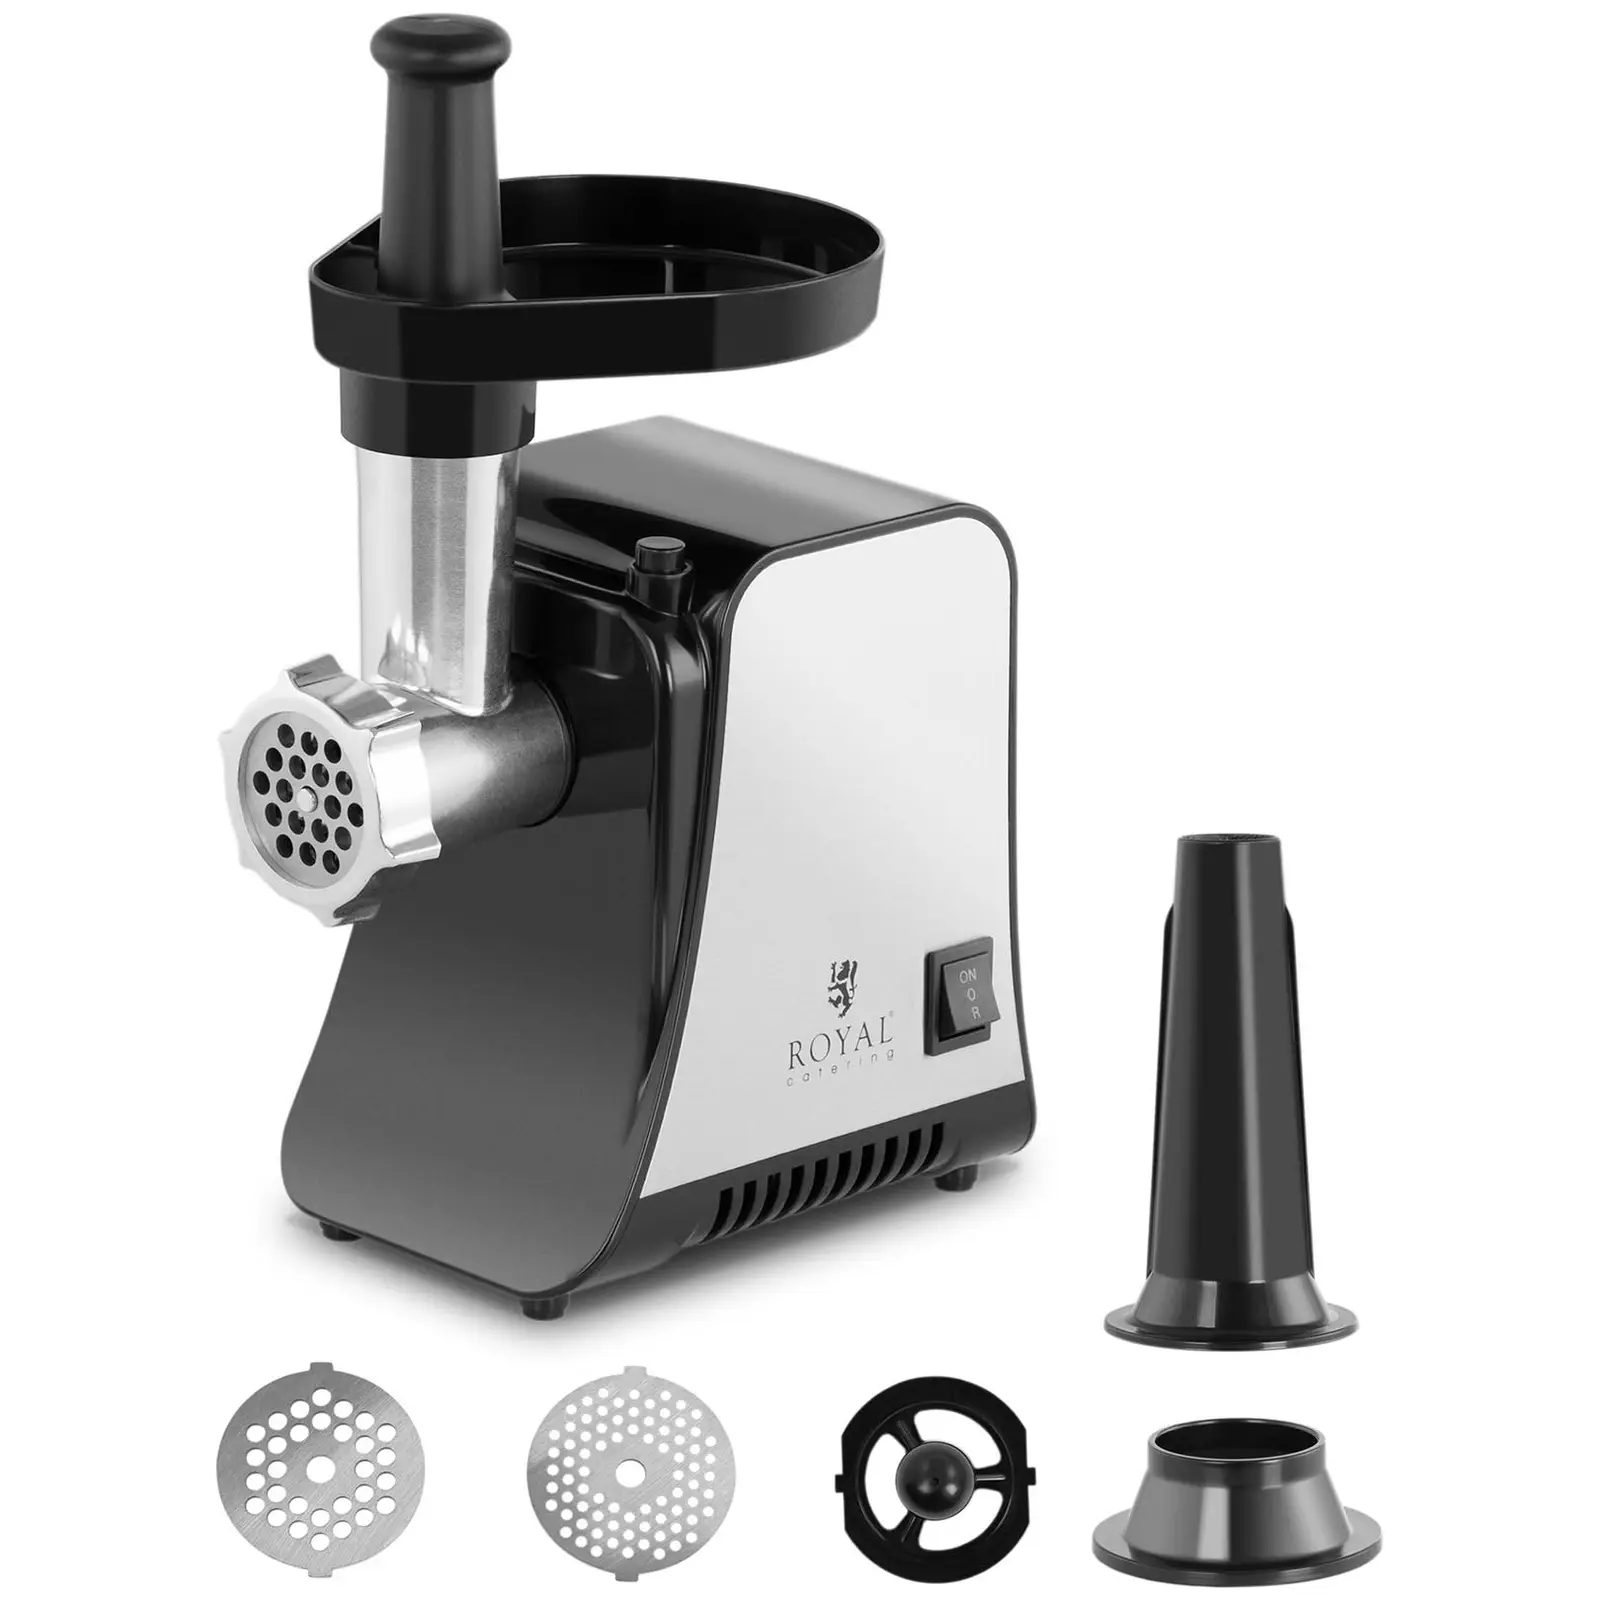 Manual vs Electric Meat Grinders – What to Choose